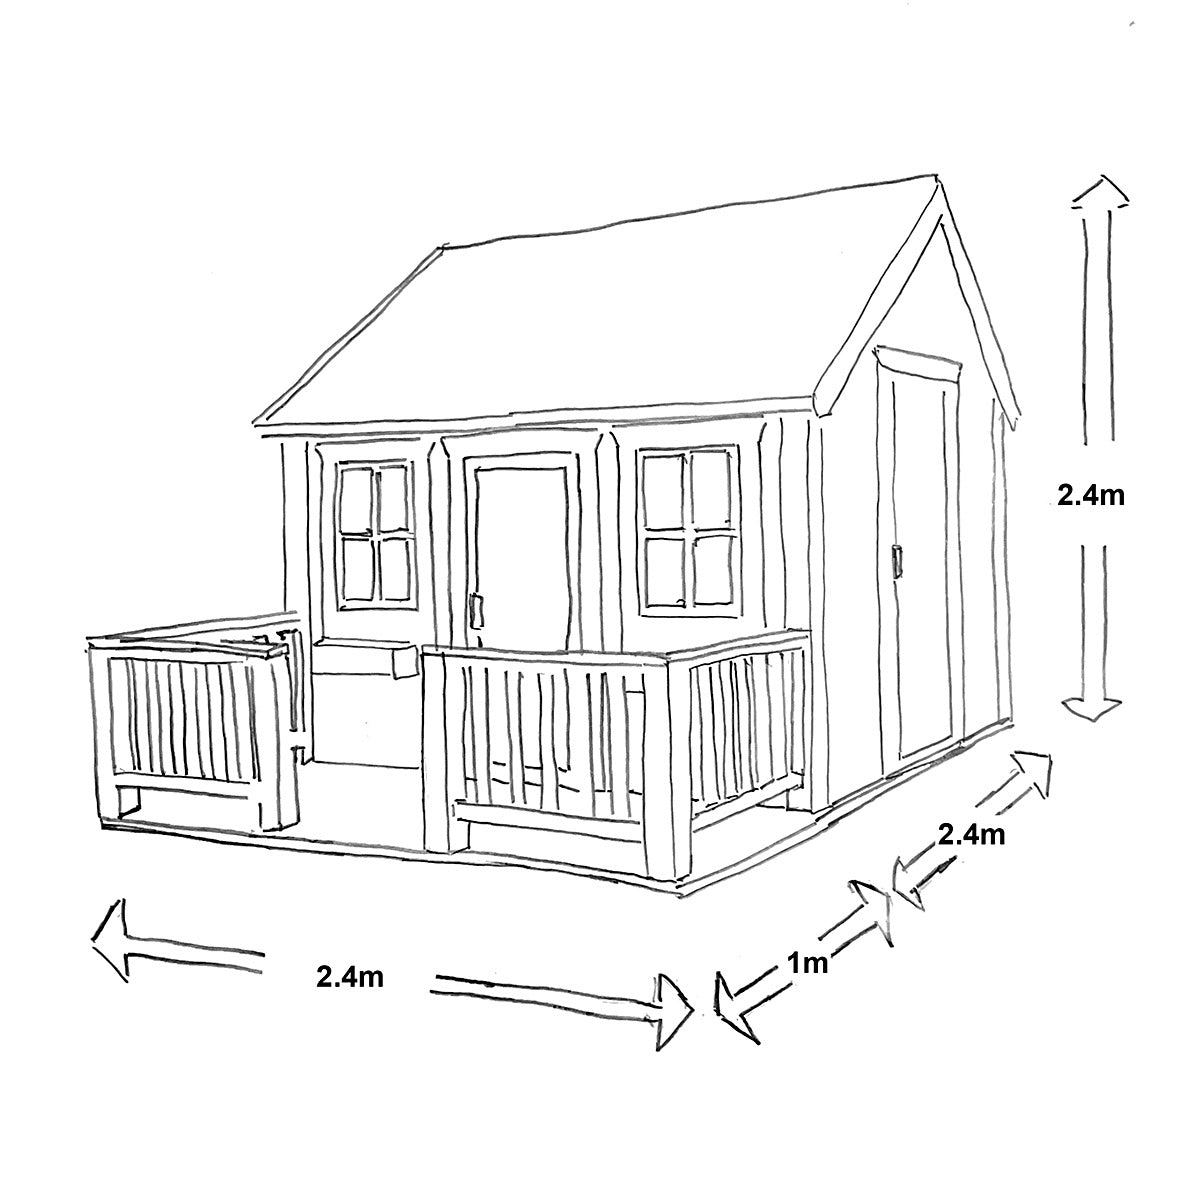 Pencil drawing of a playhouse with main dimensions by KidsPlayHouses_EU